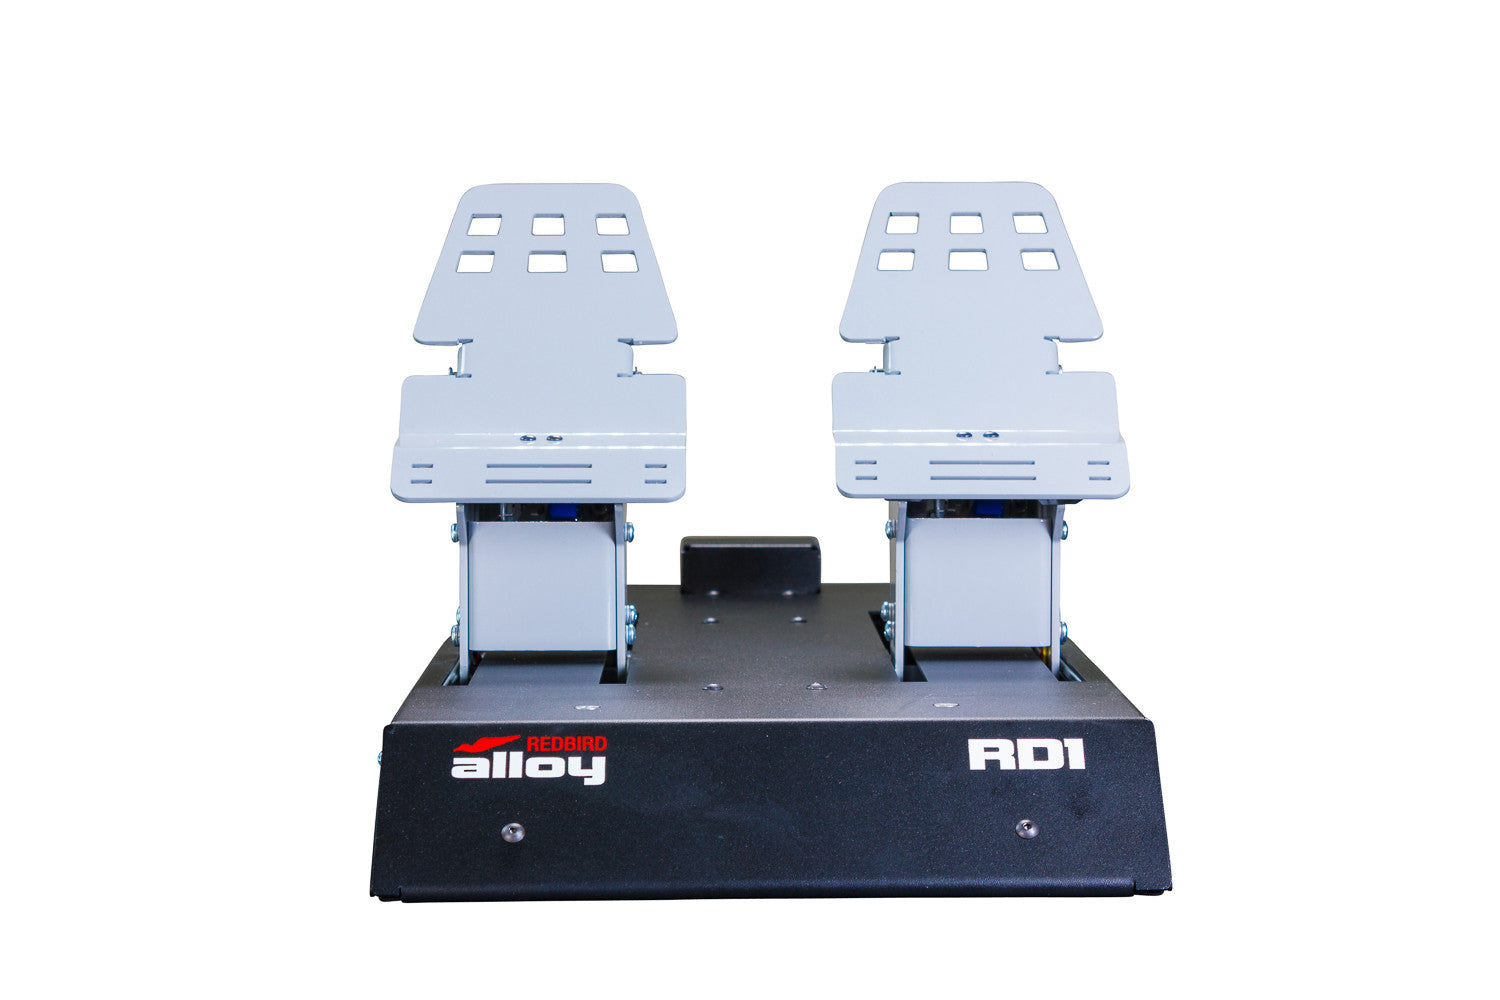 RH ROTOR rudder pedals Part 1 - Unboxing 